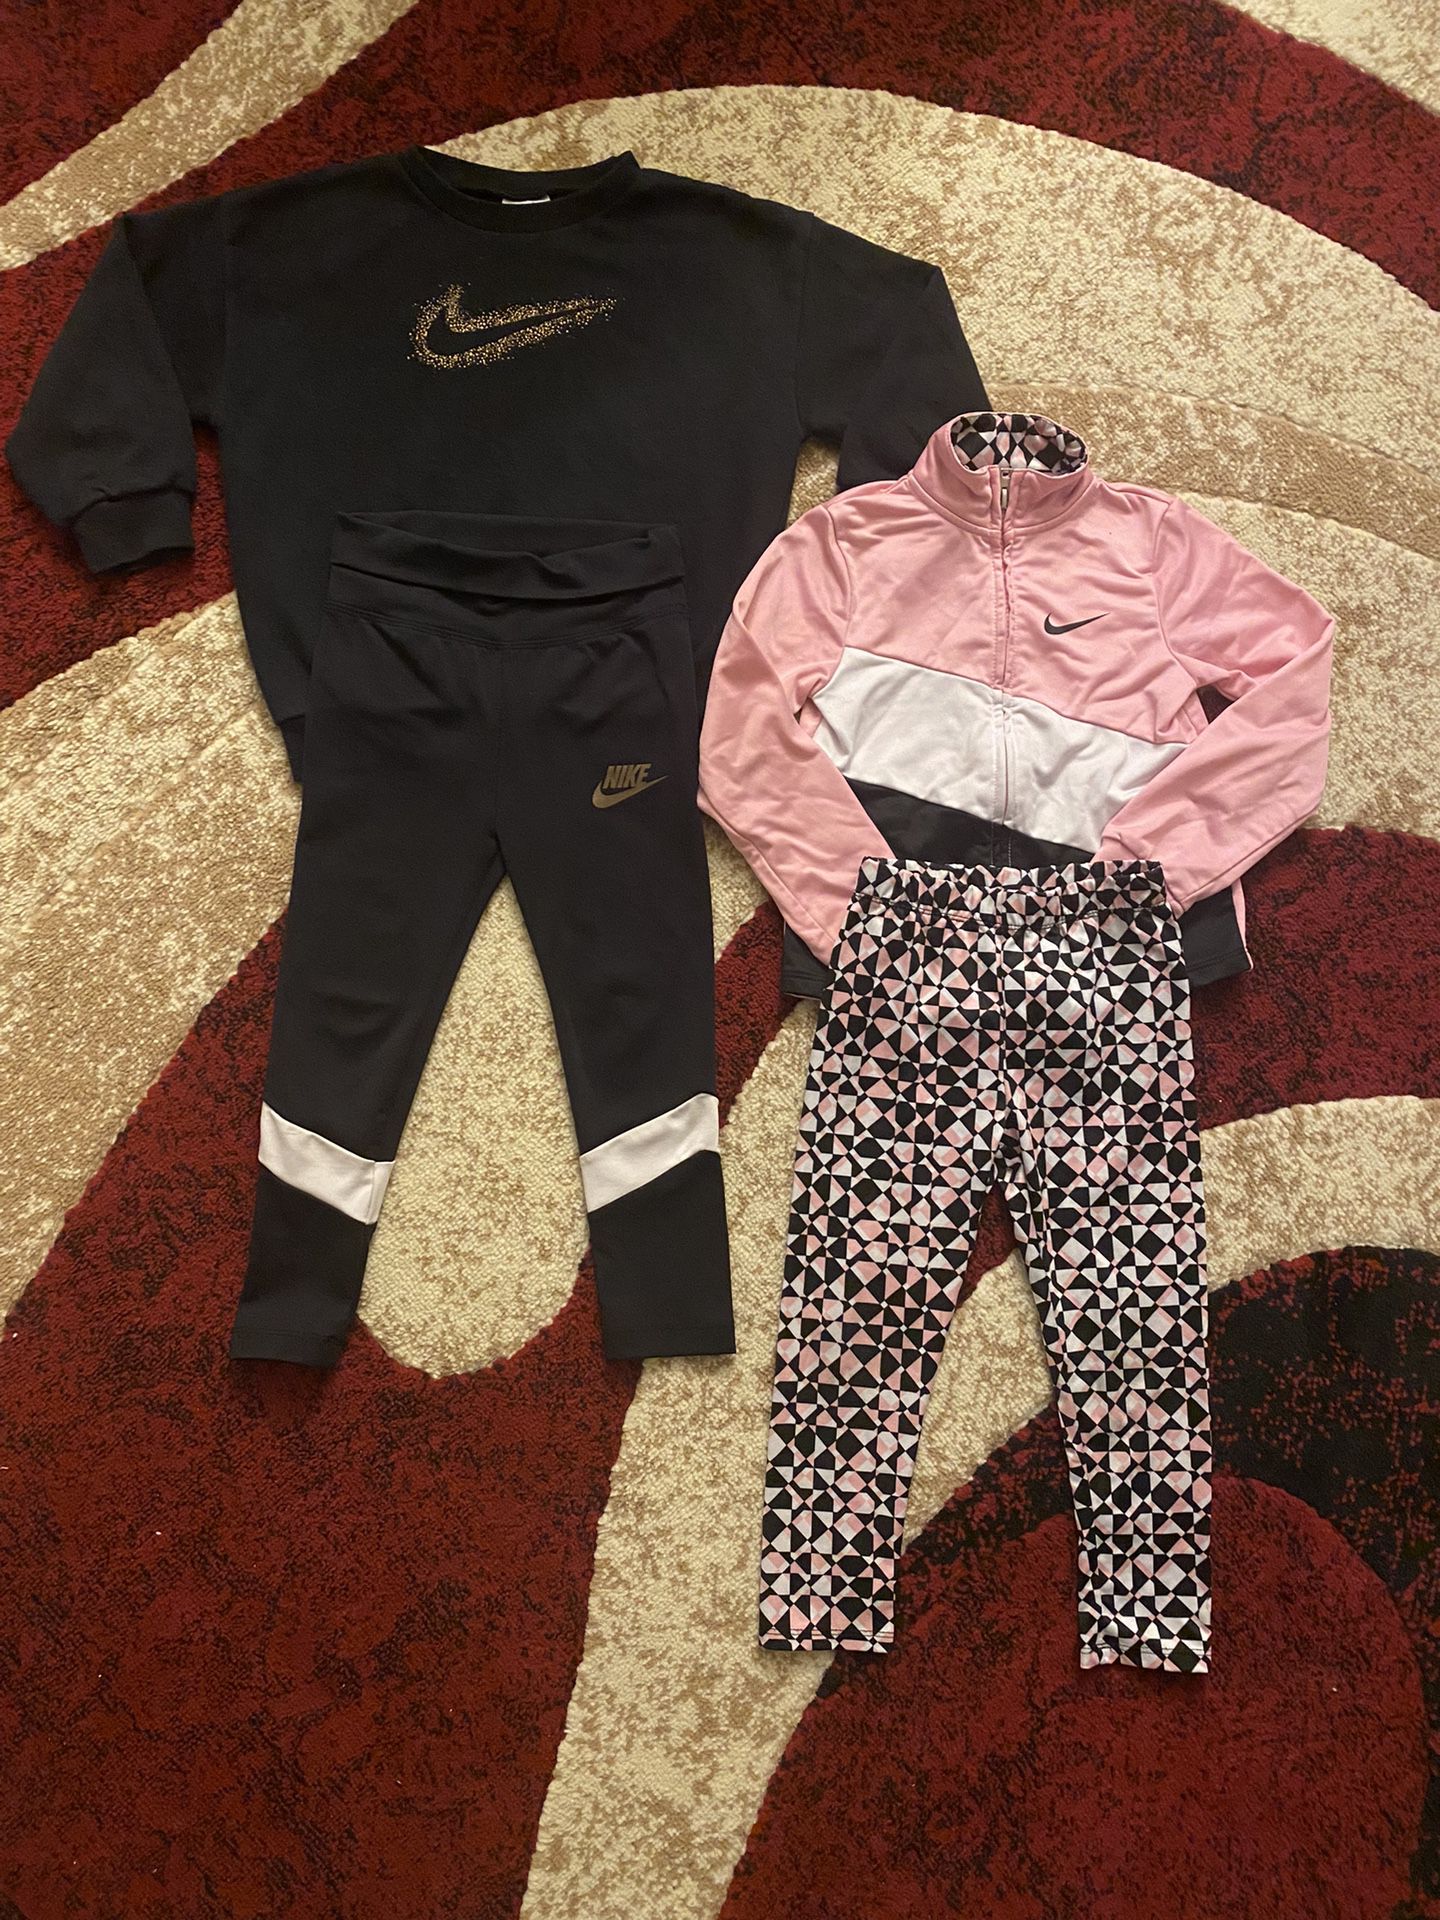 Nike Sweat Suits Deal 